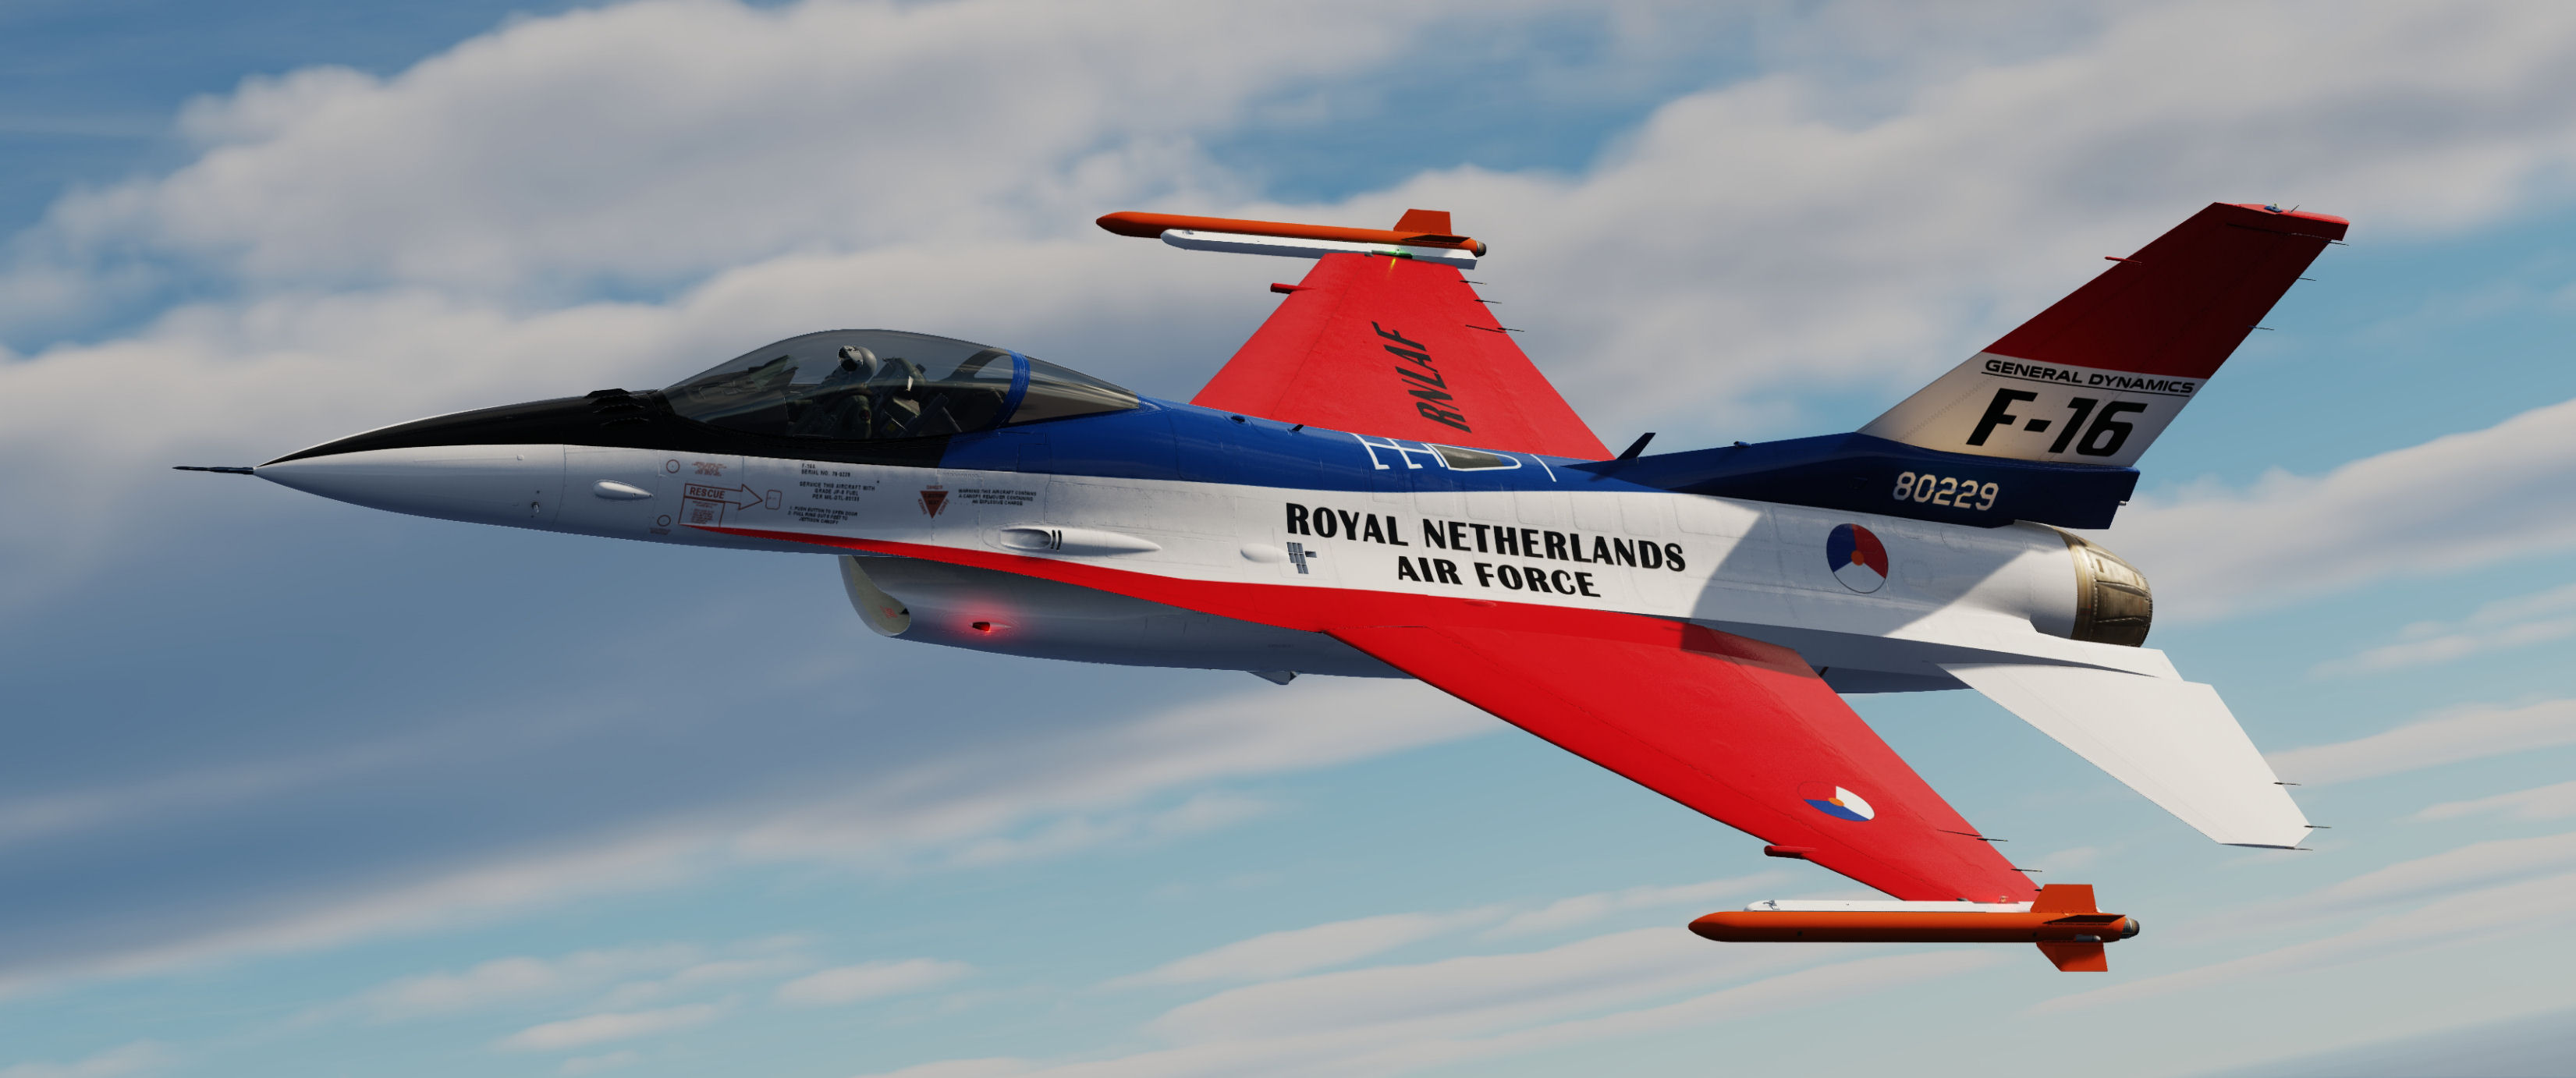 RNLAF J-229, special 25 years of F-16 livery by Wine.